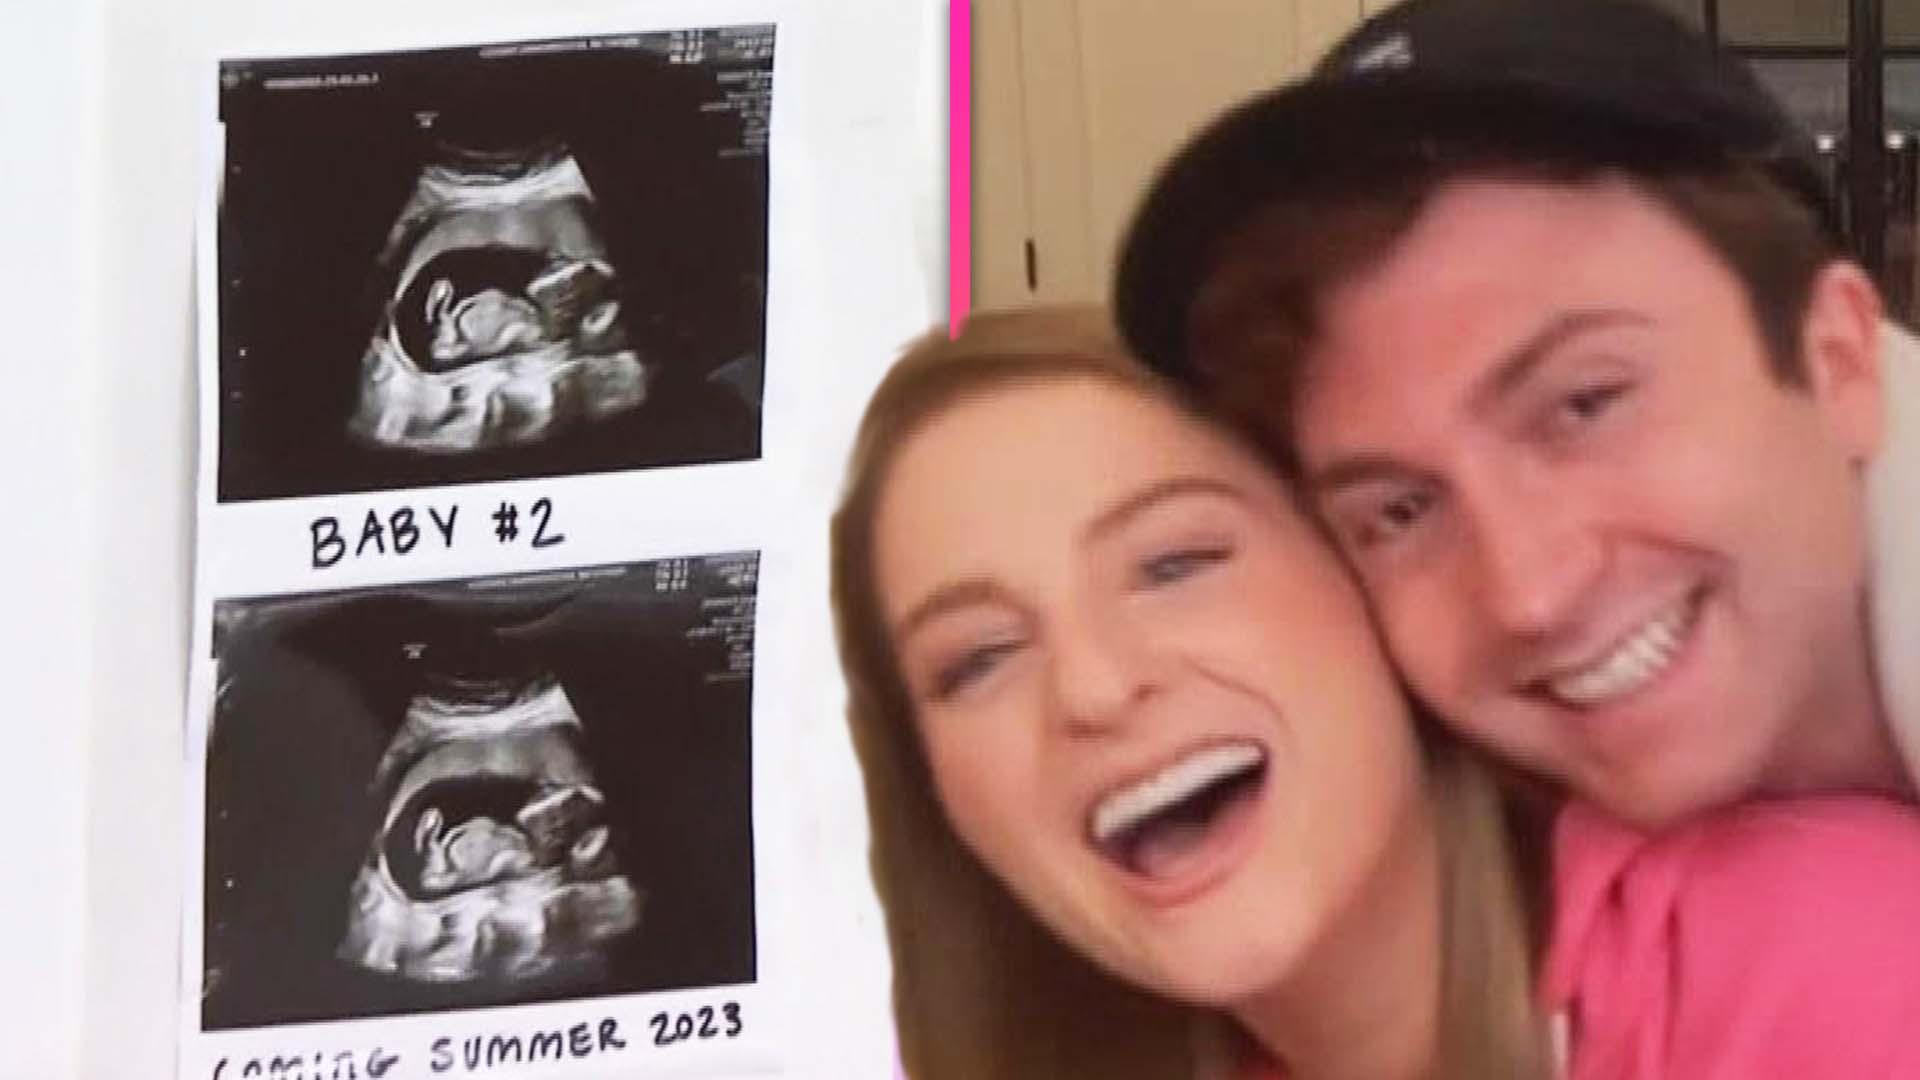 Meghan Trainor announces her second pregnancy - after opening up